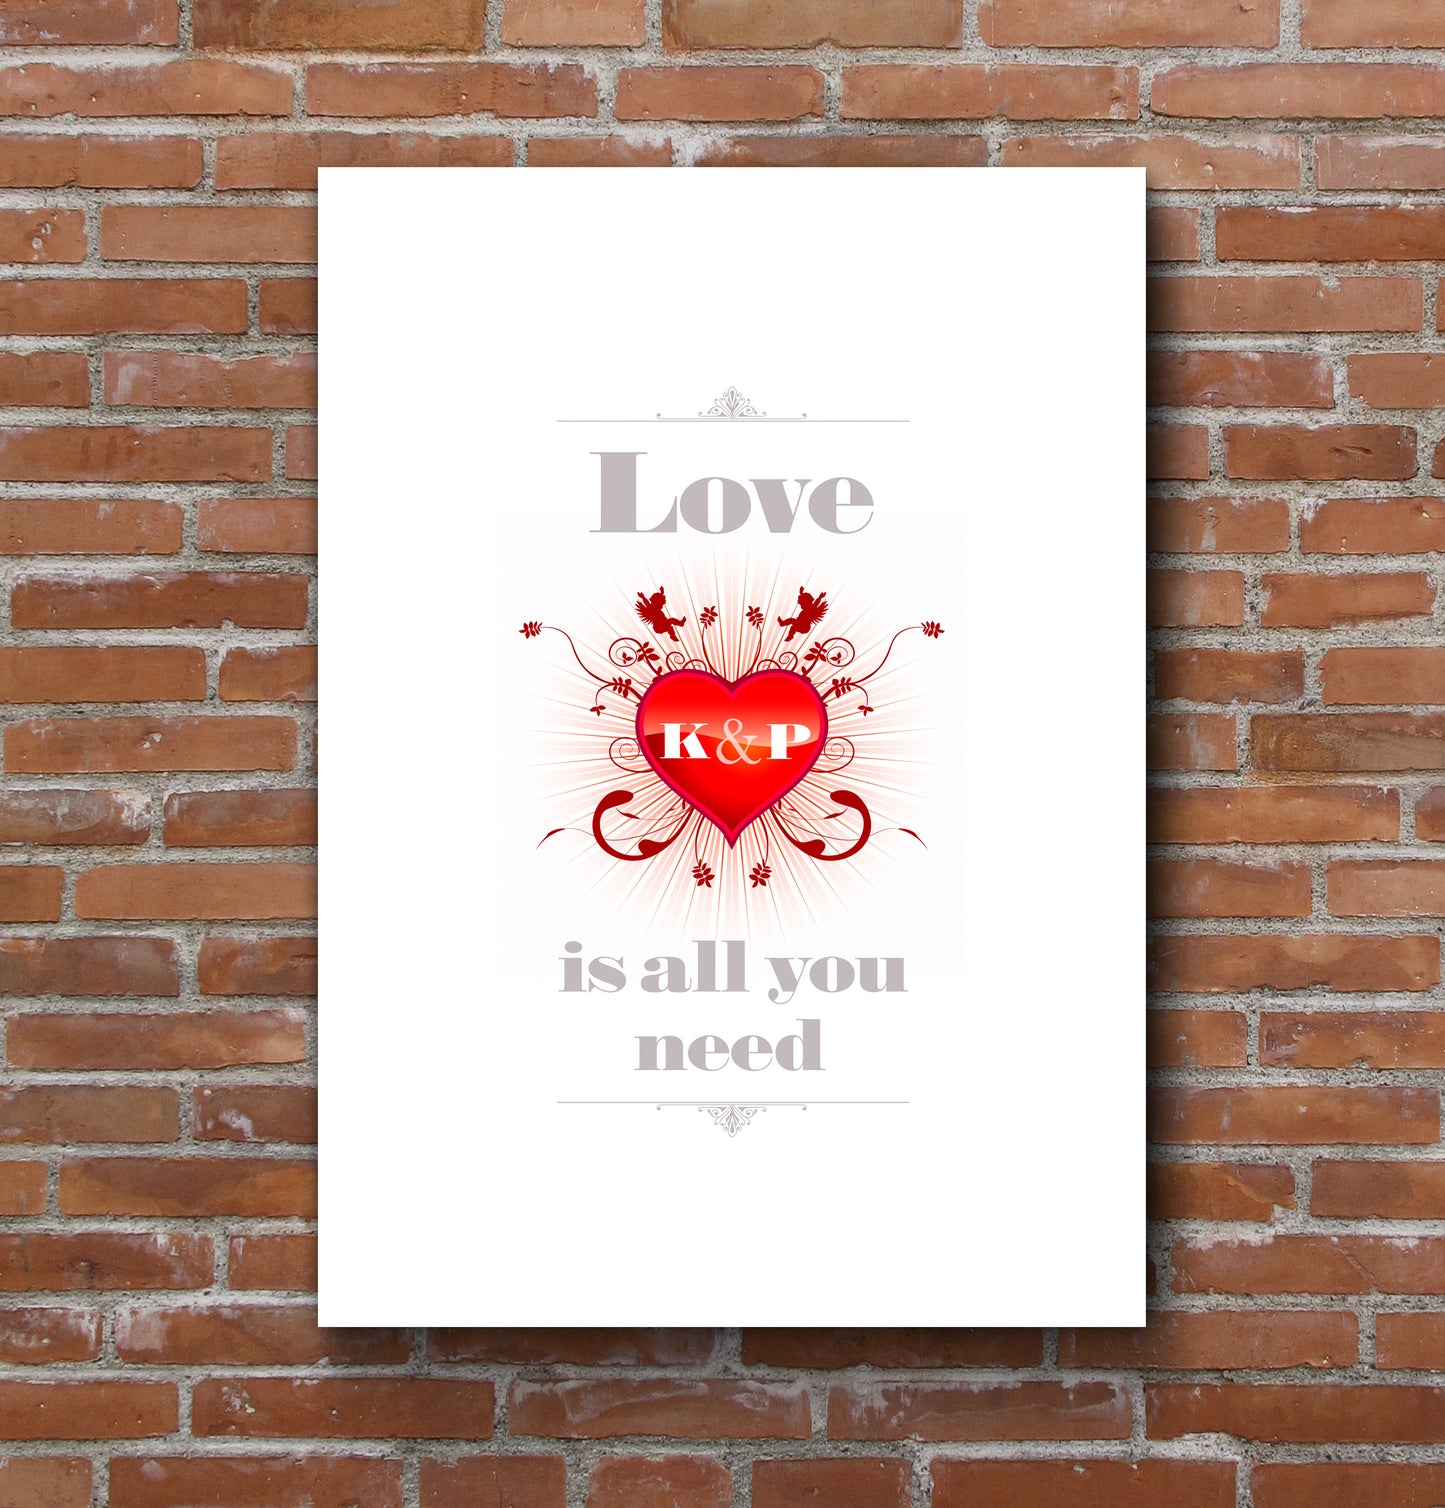 Love is all you need - Personalised Wall Art Print